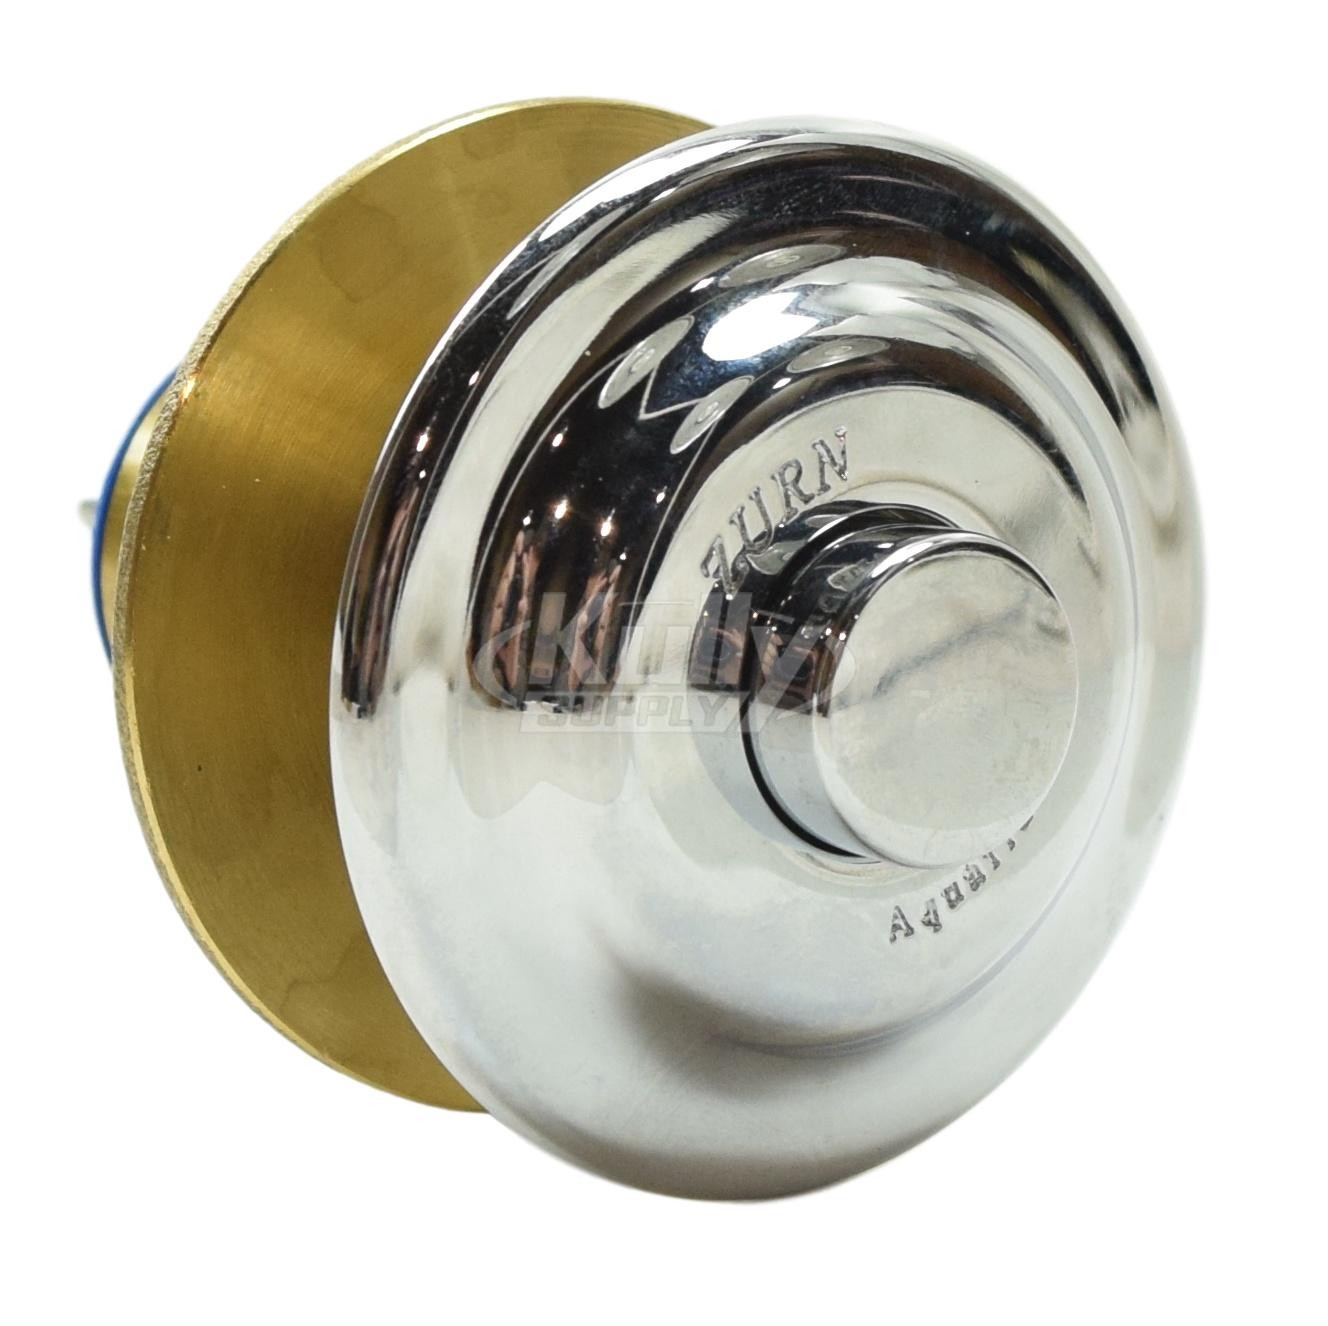 Zurn P6000-NL-3.75L Small Push Button Assembly 3-3/4" LDIM (for 1" Wall Depth)